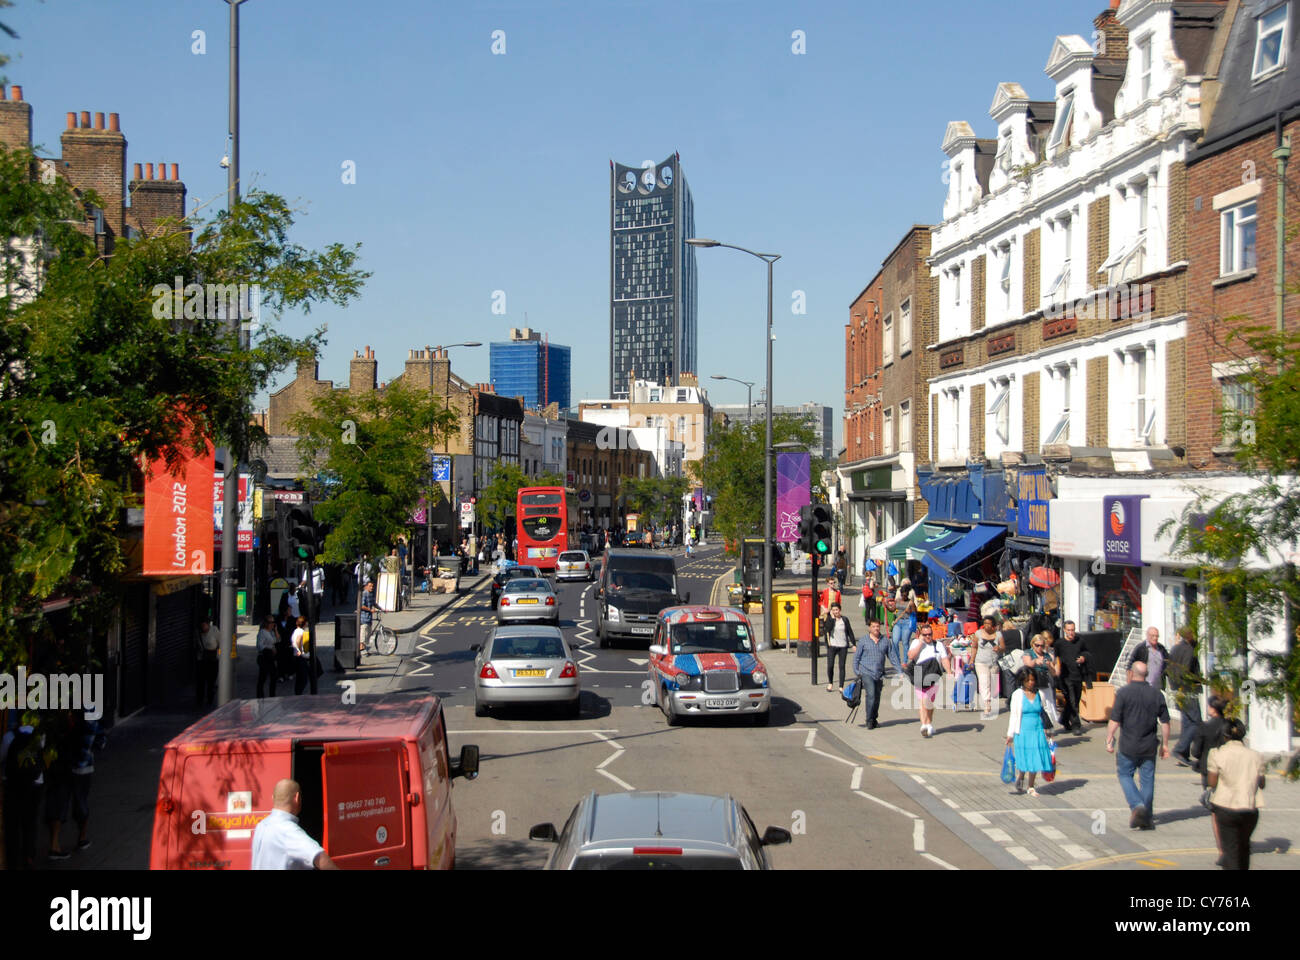 Street view in south east London with Strata Tower in distance London UK Stock Photo